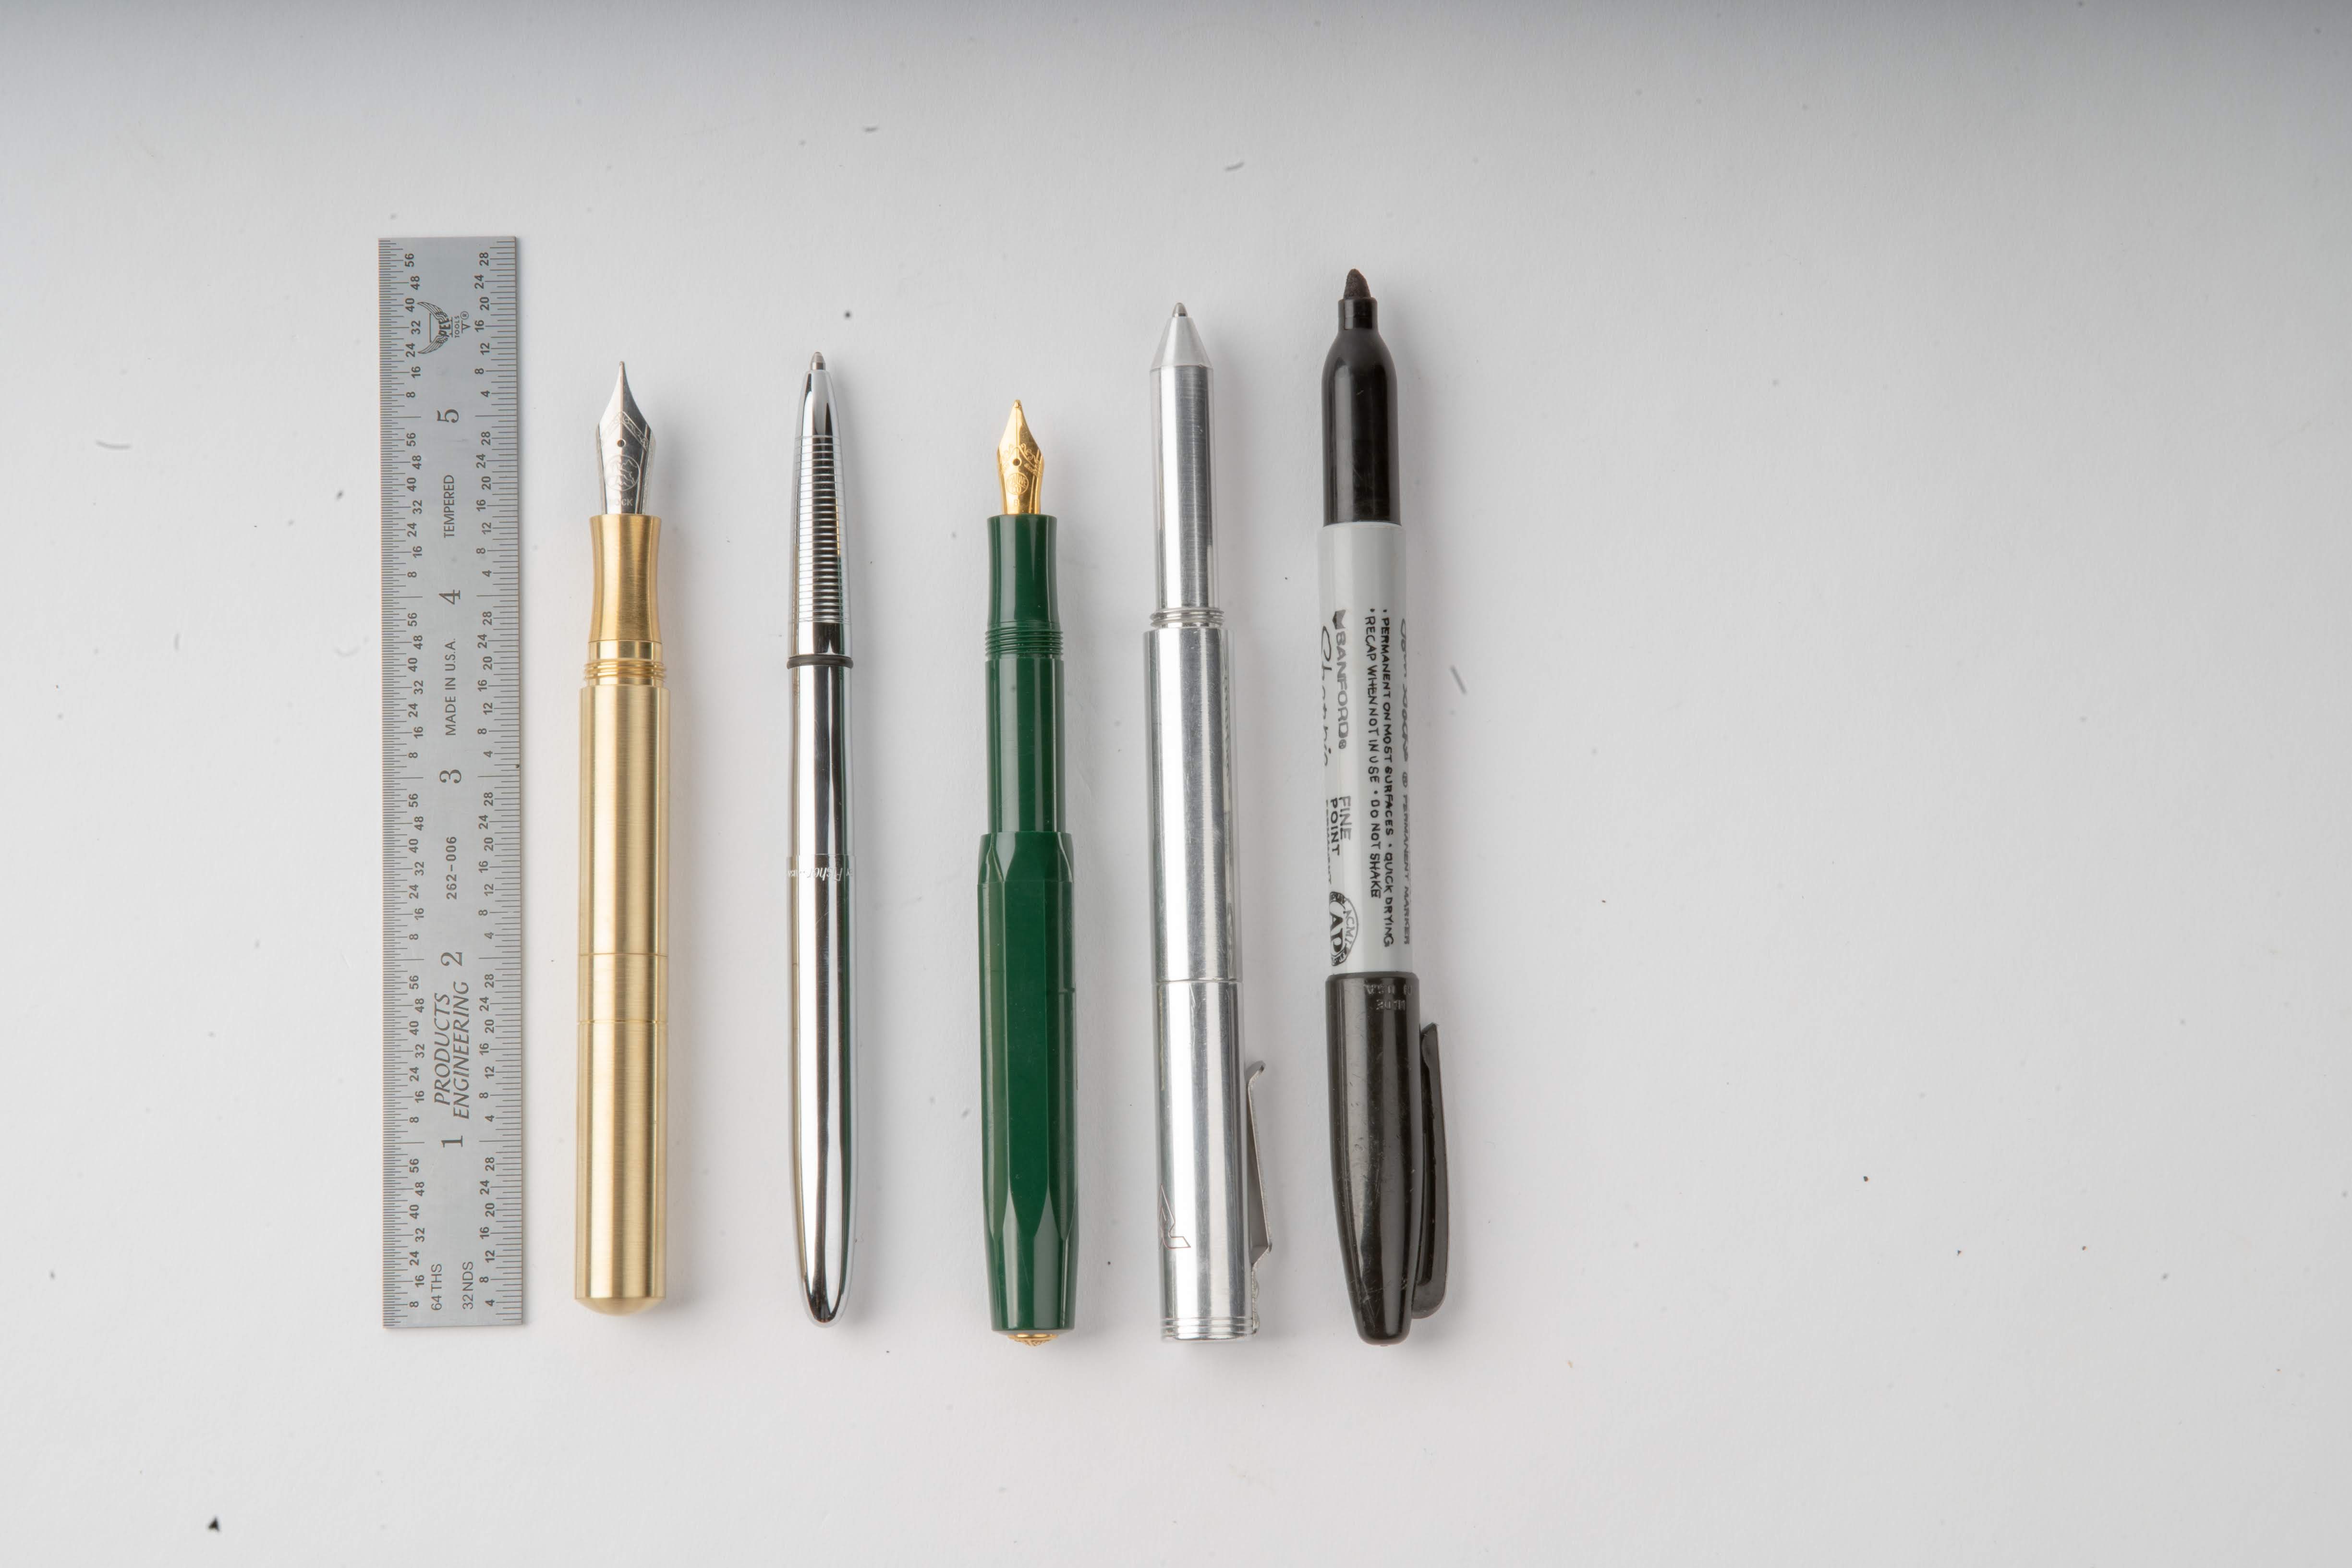 Solid Brass and Faceted Brass "Pocket Six" Fountain Pen